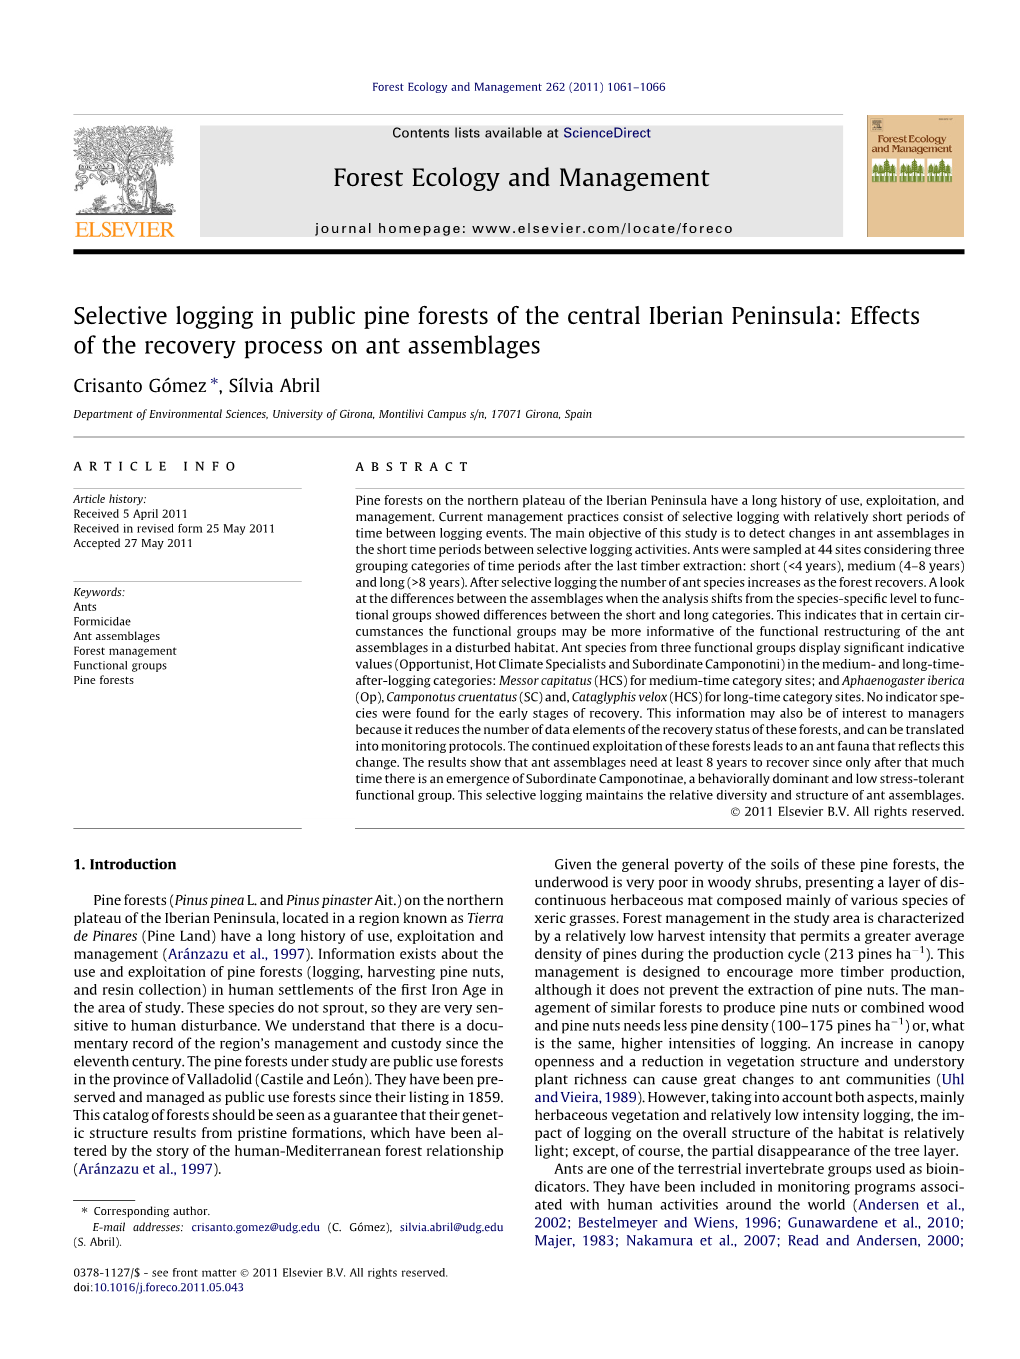 Selective Logging in Public Pine Forests of the Central Iberian Peninsula: Effects of the Recovery Process on Ant Assemblages ⇑ Crisanto Gómez , Sílvia Abril